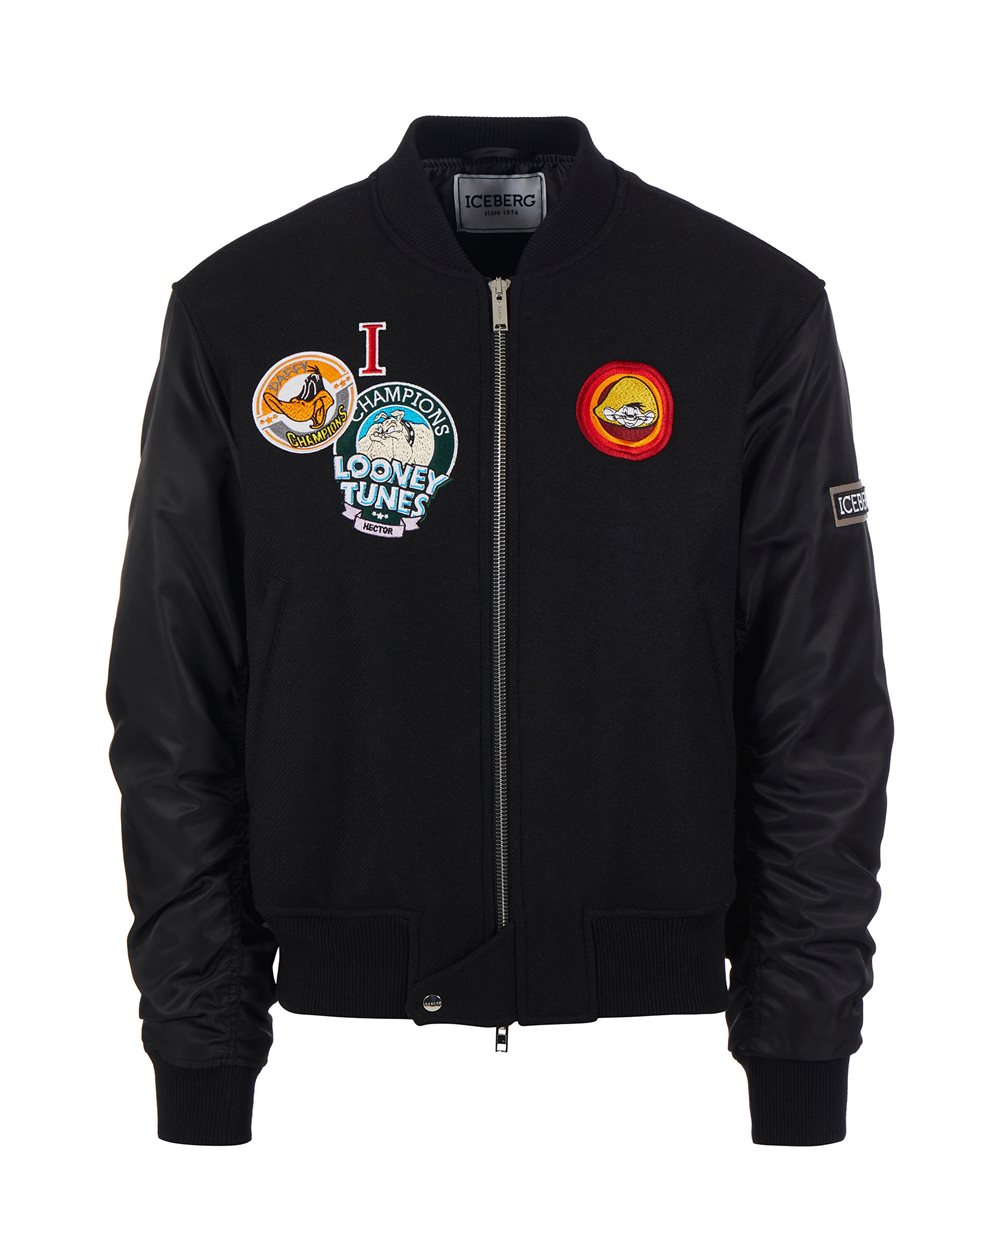 Bomber jacket with Looney Toones patch and logo - Looney Tunes selection | Iceberg - Official Website